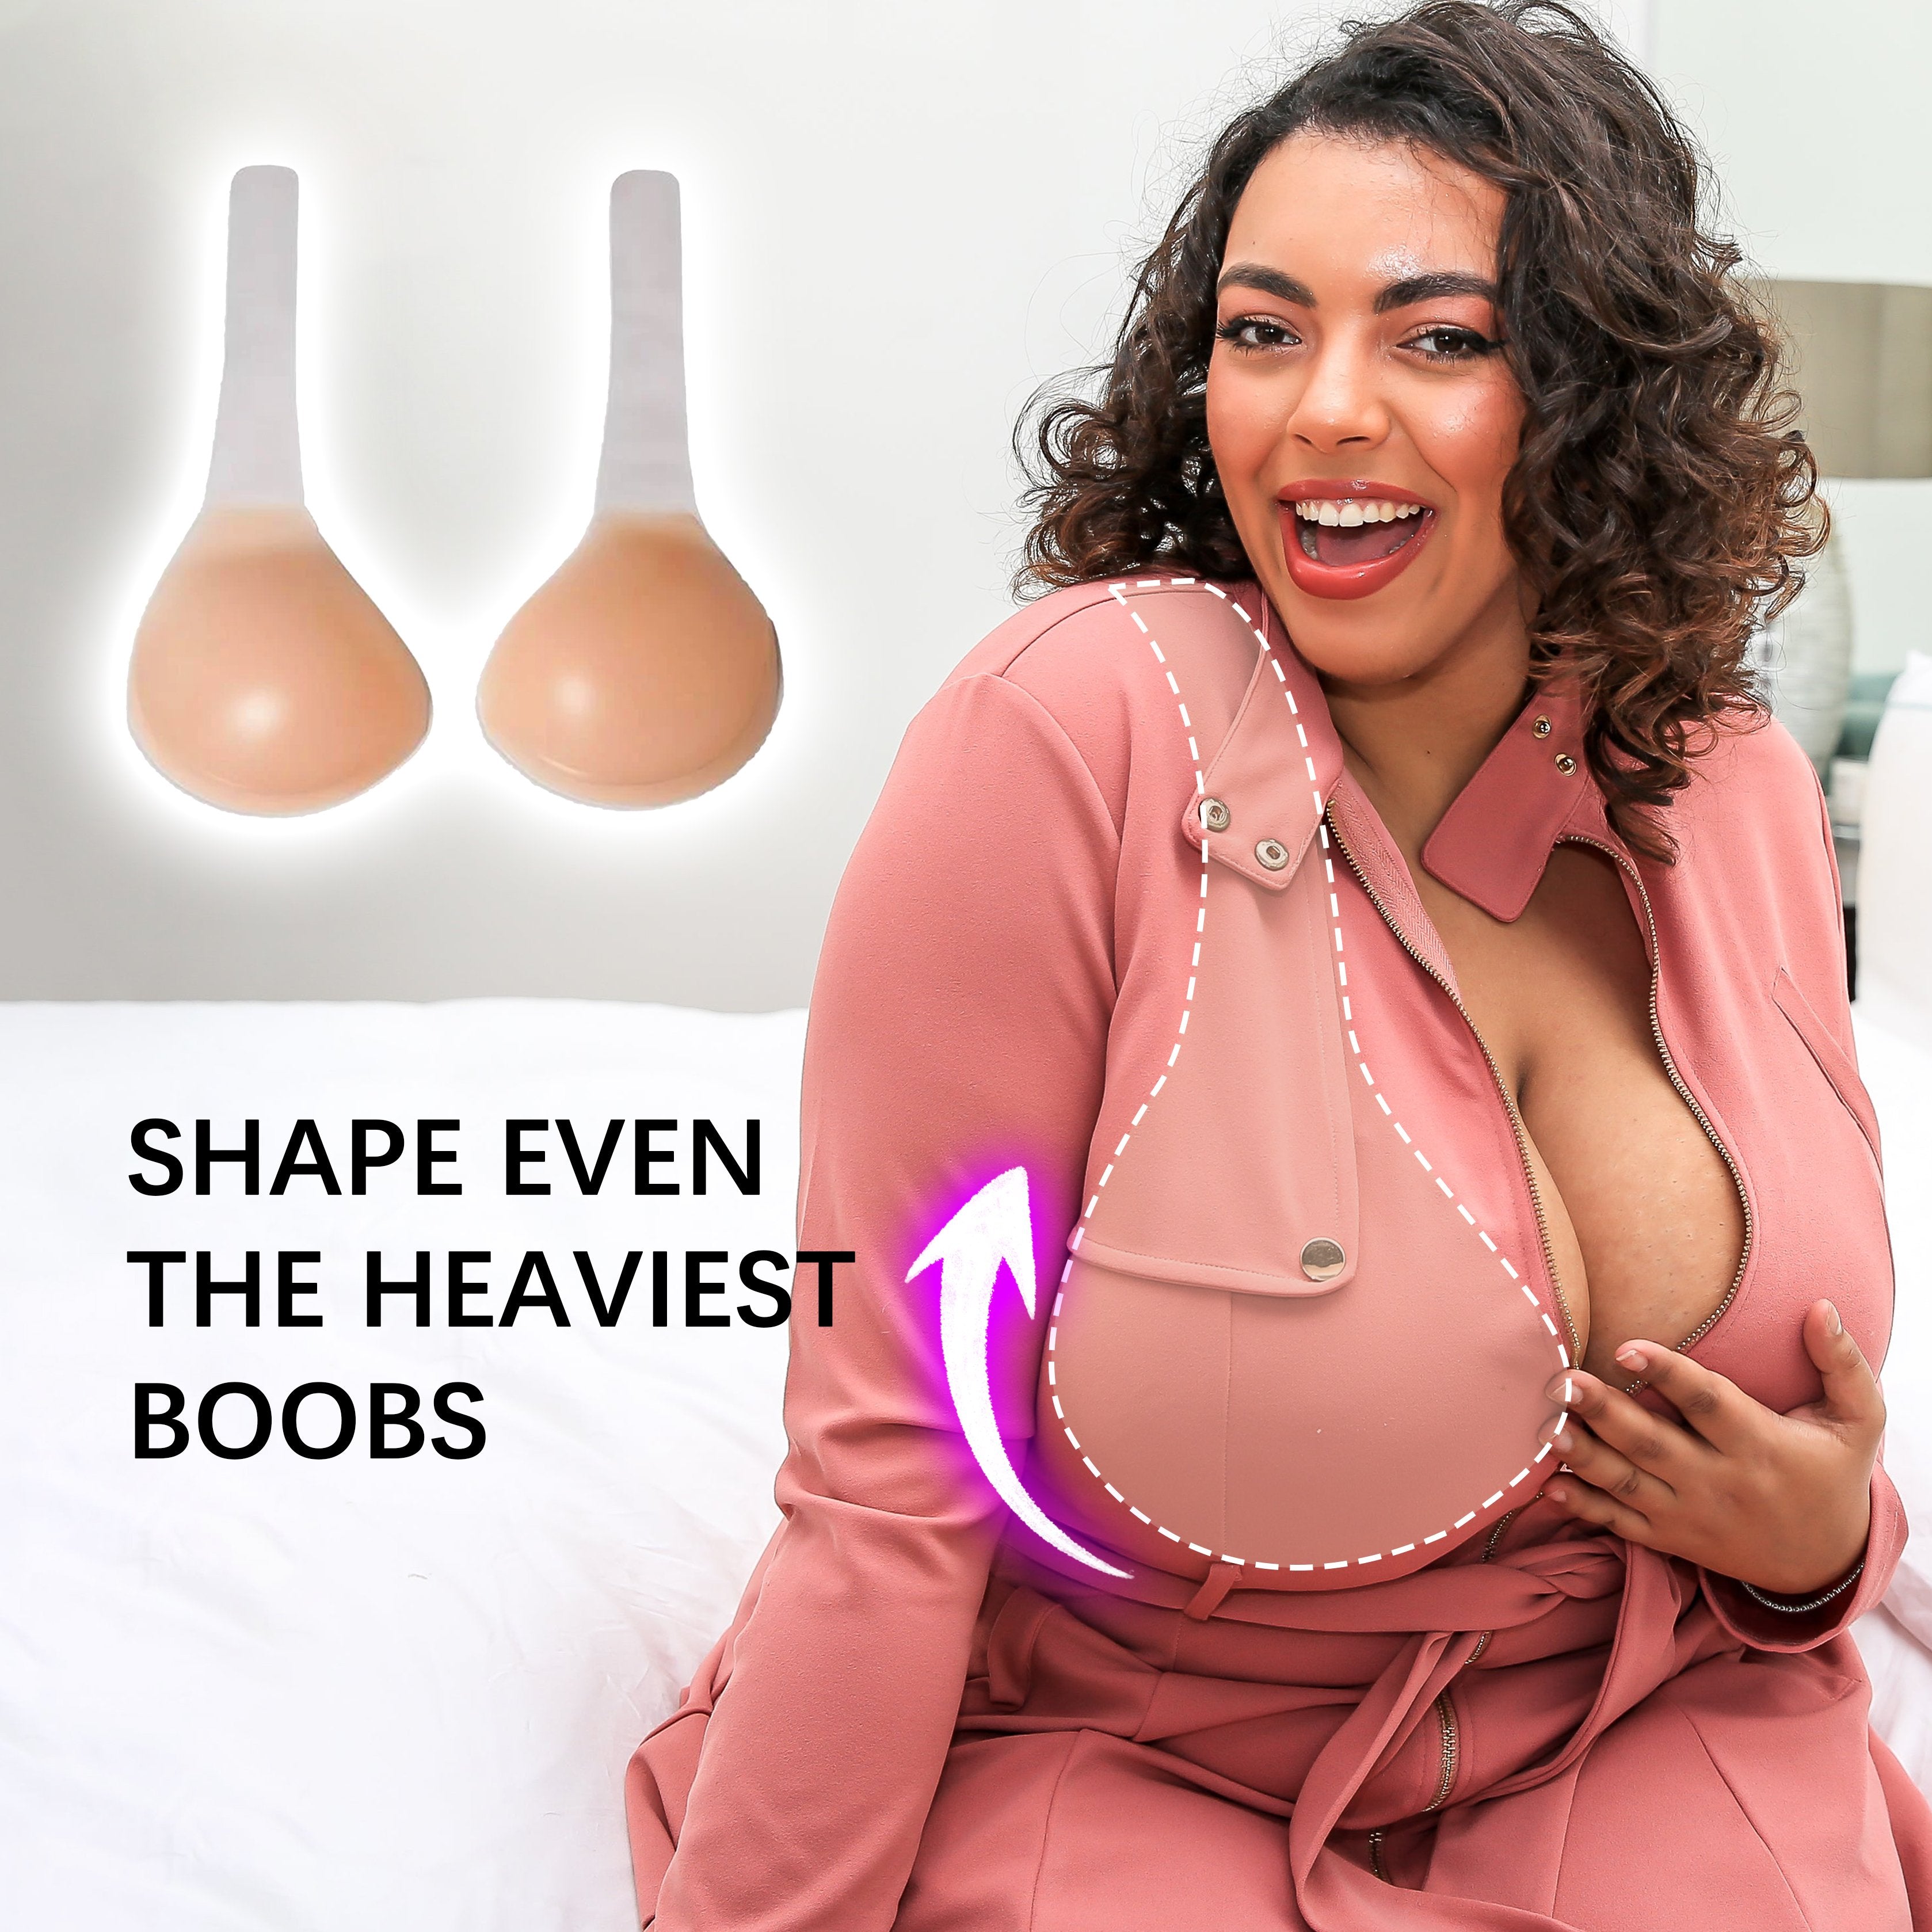 Adhesive Breast Gather Push Up Strapless